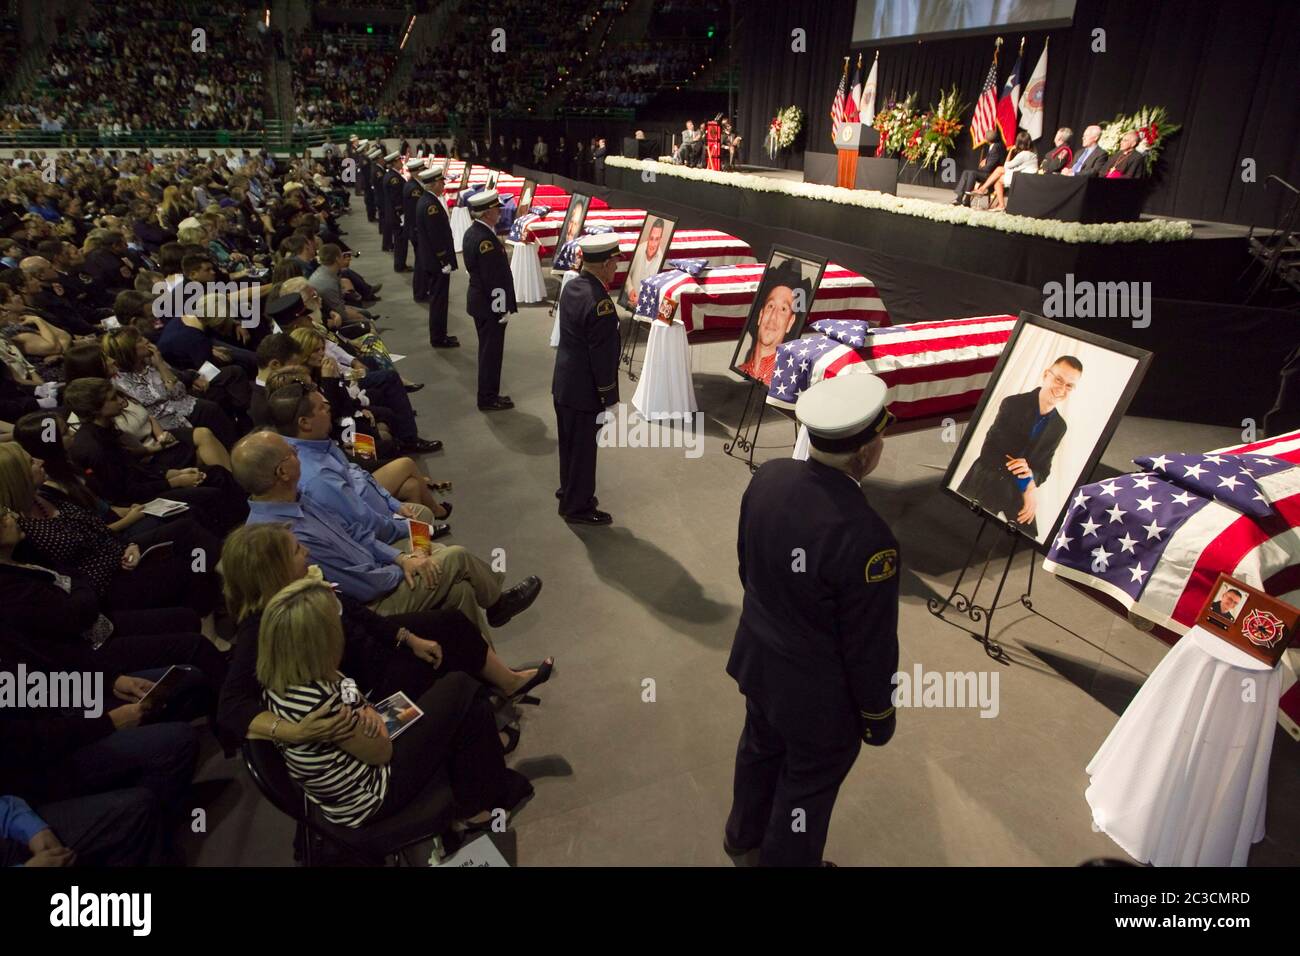 April 25, 2013 Waco, Texas USA: Honor guard members stand in front of flag-draped coffins as thousands of mourners attend a memorial for firefighters killed in the West, Texas, fertilizer plant explosion on April 17. Twelve of the 15 people killed were first responders.  ©Marjorie Kamys Cotera/Daemmrich Photography Stock Photo